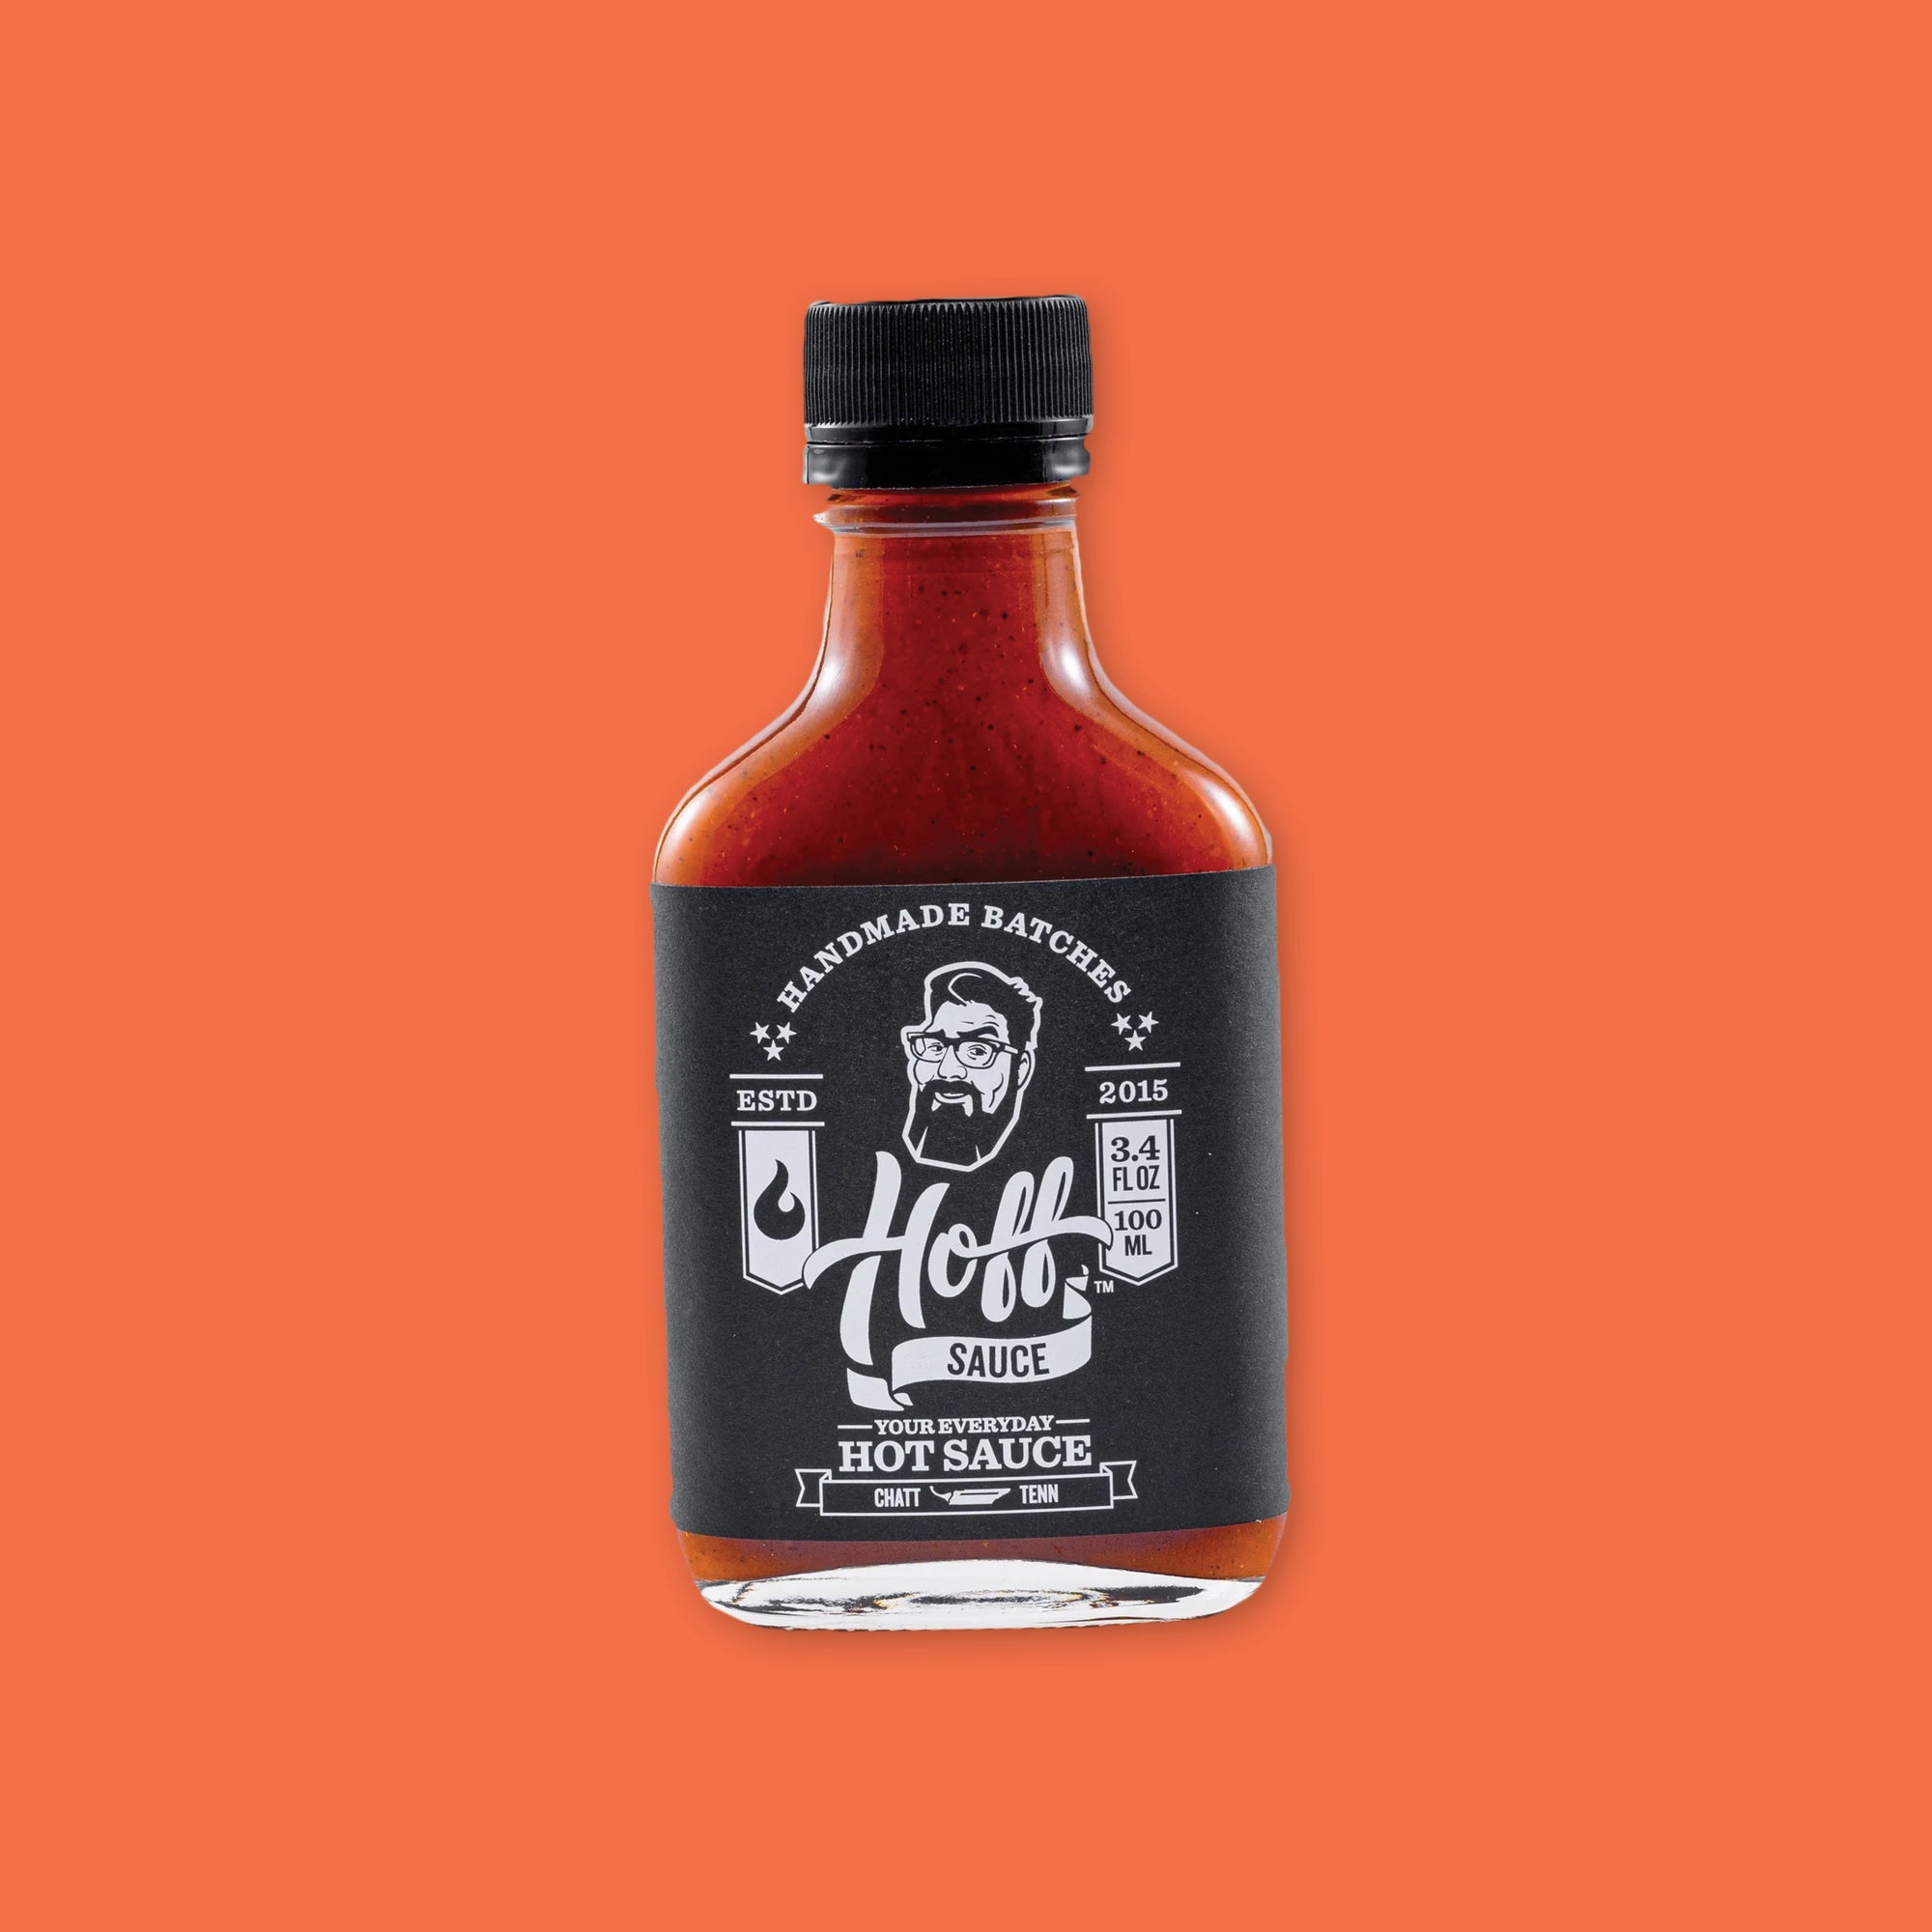 On an orangey-red background sits a bottle. This clear glass bottle has a black top and is filled with orangey-red liquid. On the black label it says "HANDMADE BATCHES" in white, all caps serif font and there is an illustration in white of a man's face with glasses, crazy hair, and a beard. It says "Hoff's SAUCE" in white, script and block font. It also says "YOUR EVERYDAY HOT SAUCE" in white, all caps serif font. 3.4 FL OZ 100 ML